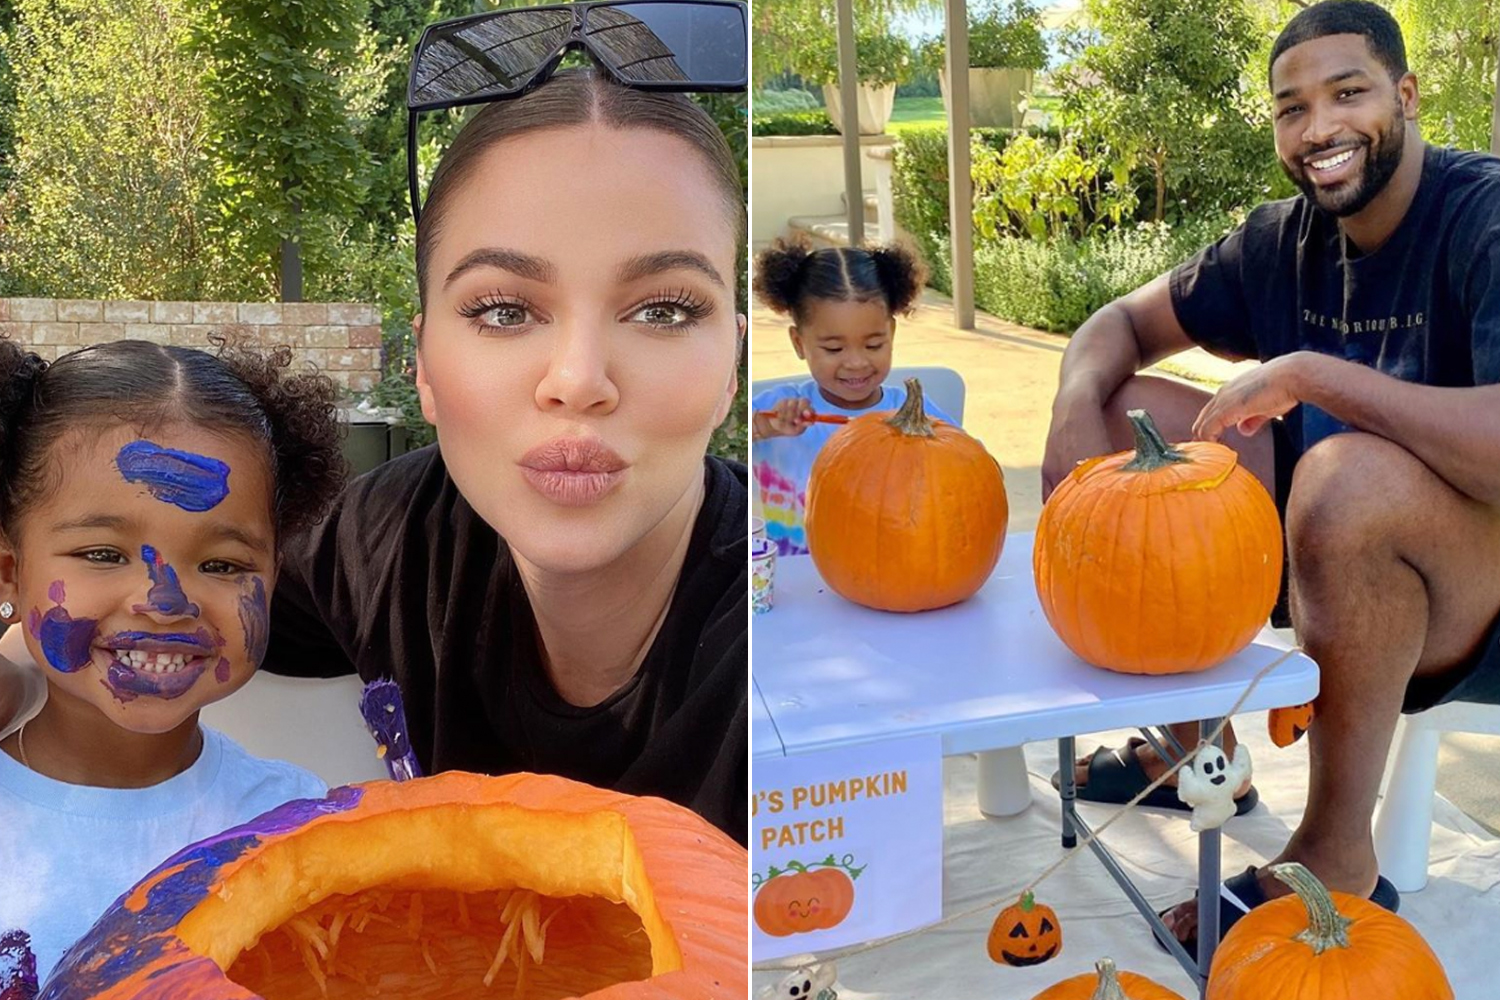 Khloe Kardashian come into Halloween essence with a party cousine ‘family pumpkin pining day’ with True and Tristan Thompson.